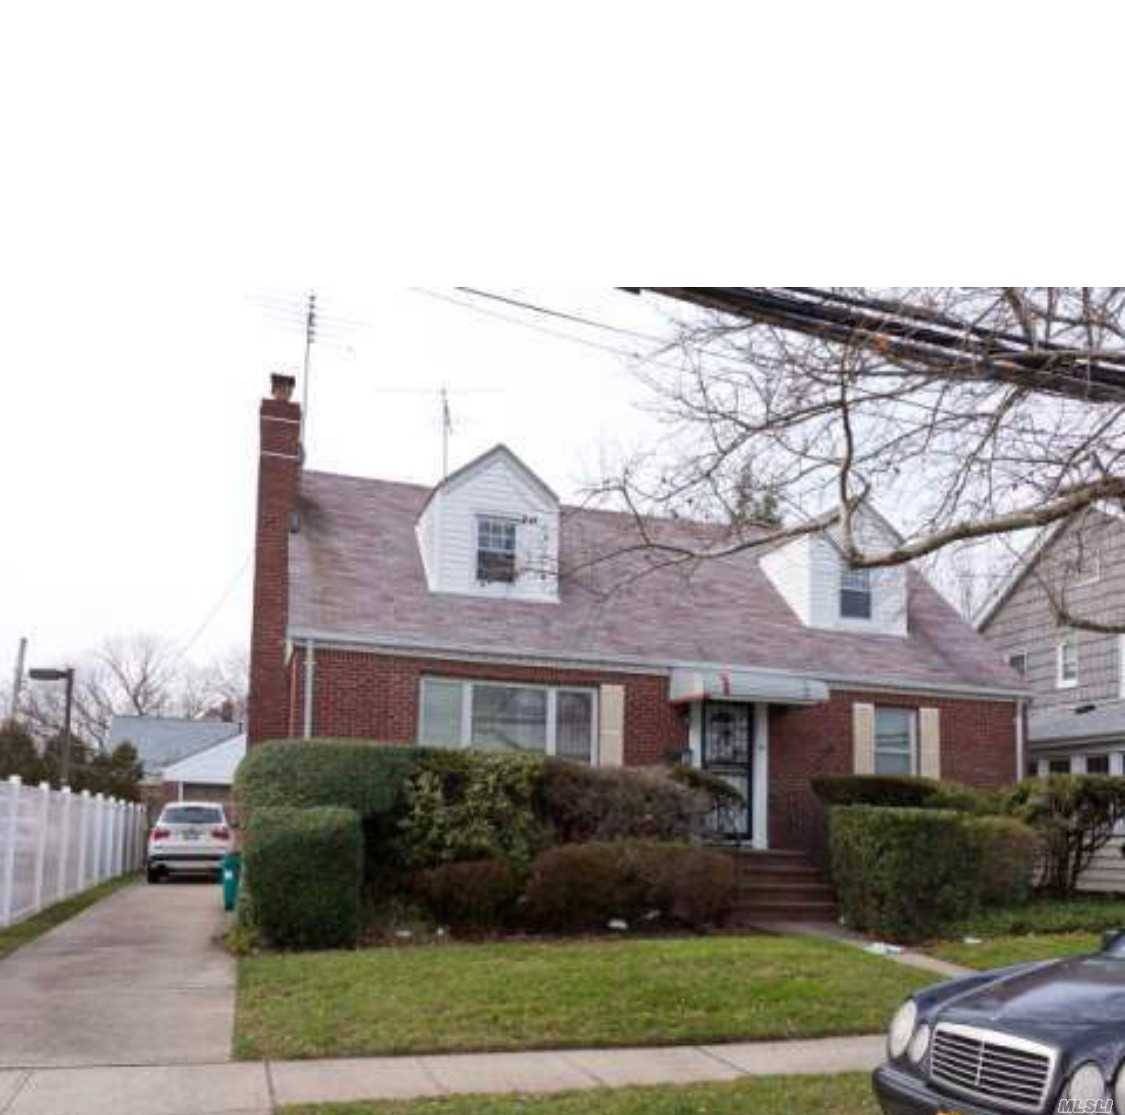 This Legal Two Family Home In The Herricks School District Is Walking Distance From Train Stations And Restaurants.